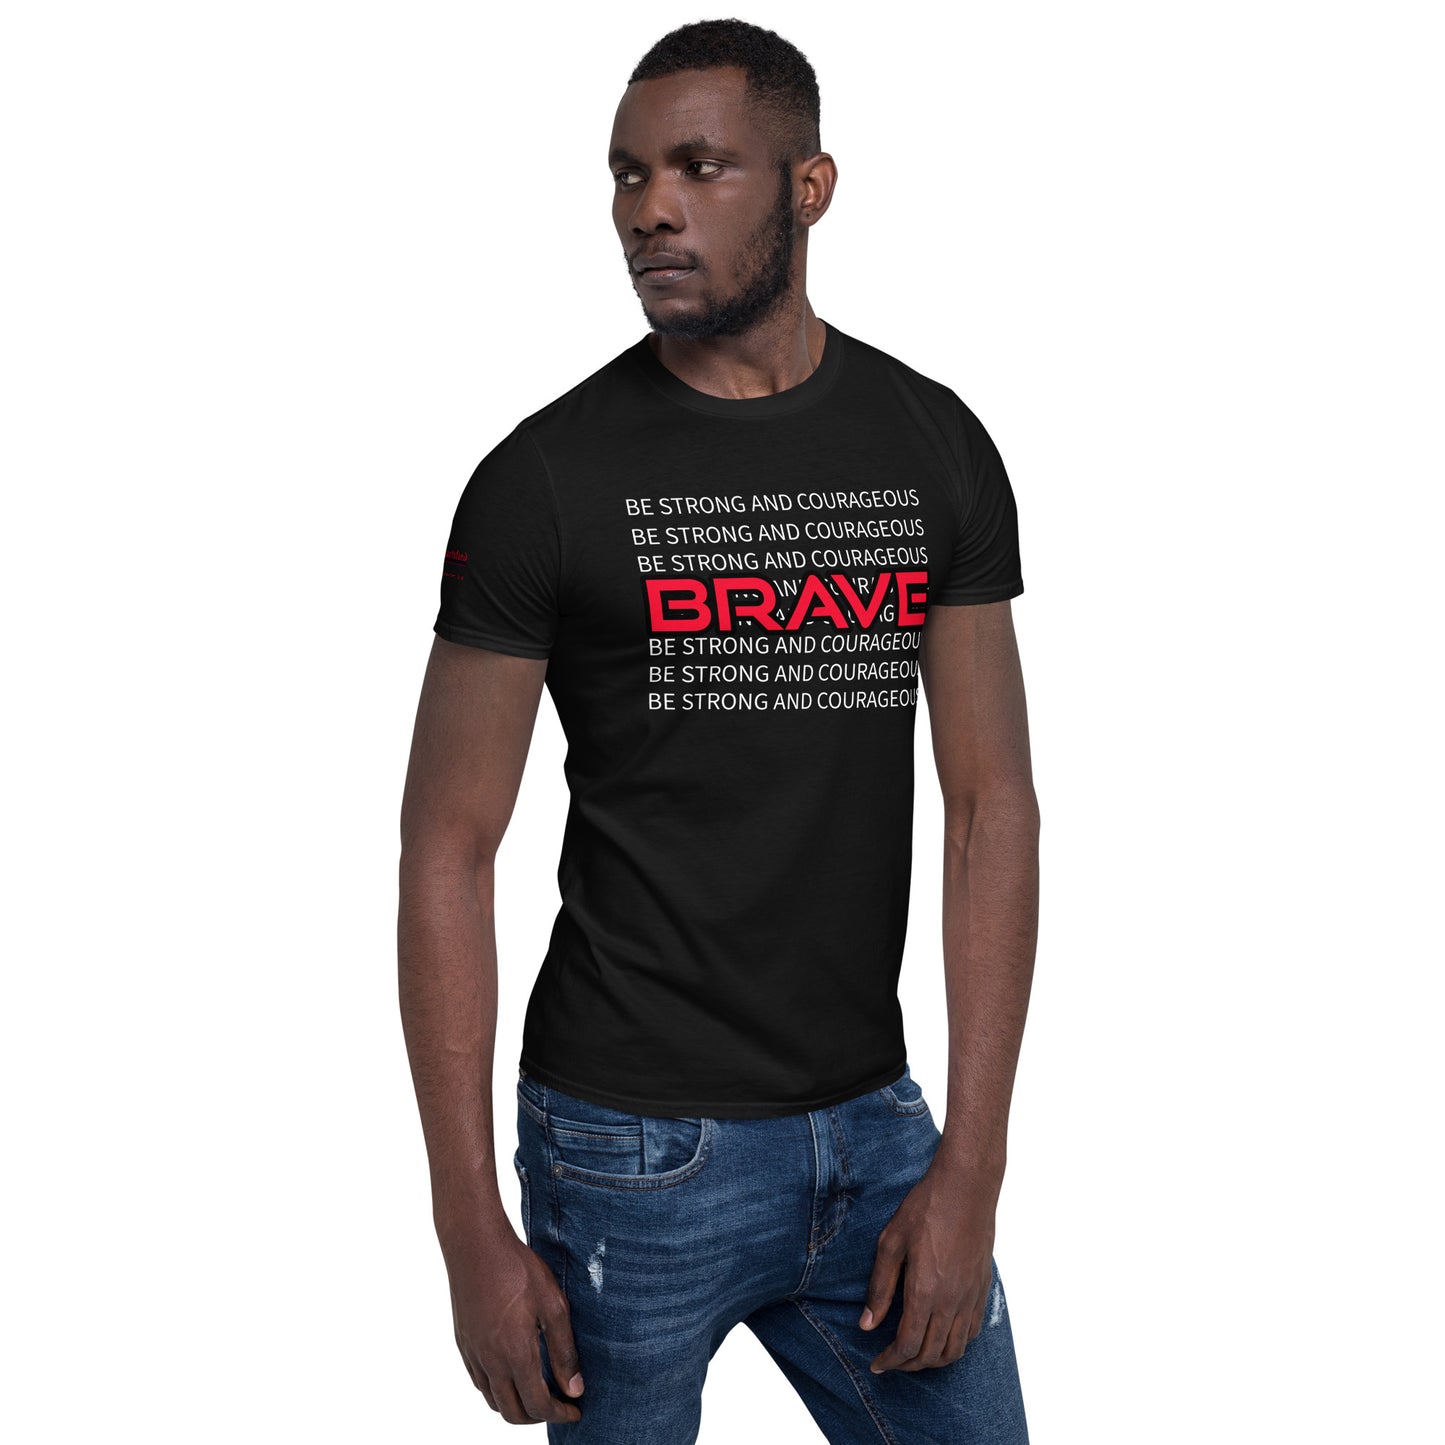 BE STRONG AND COURAGEOUS- Short-Sleeve Unisex T-Shirt